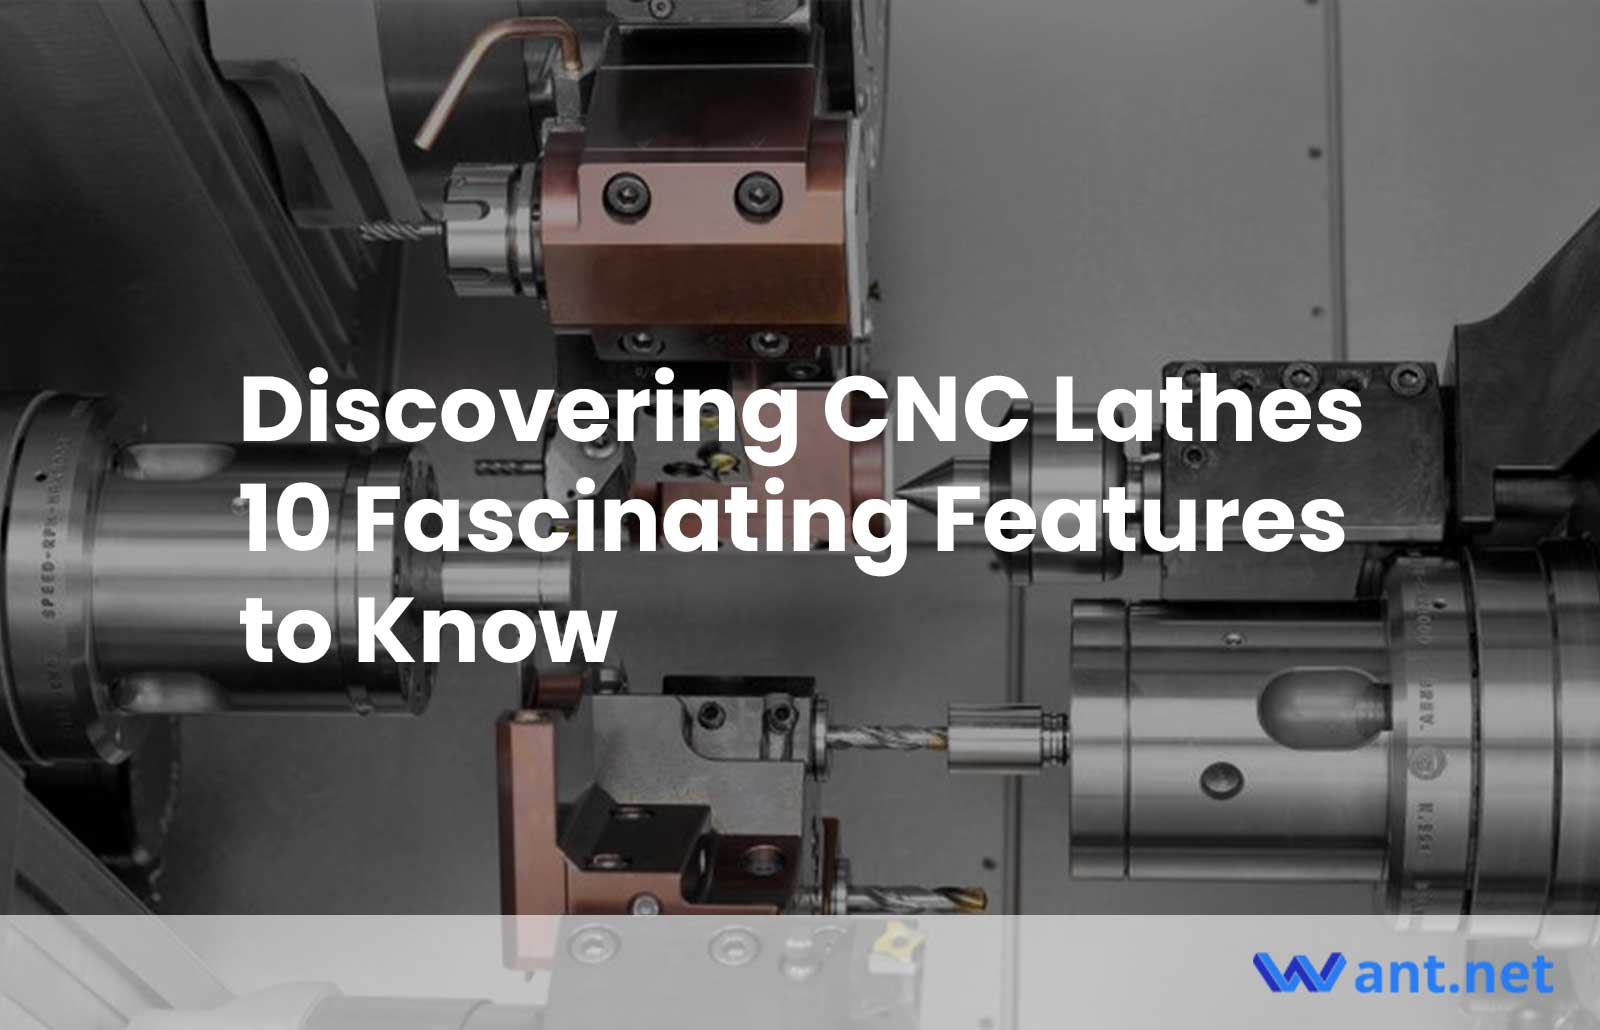 Discovering CNC Lathes: 10 Fascinating Features to Know